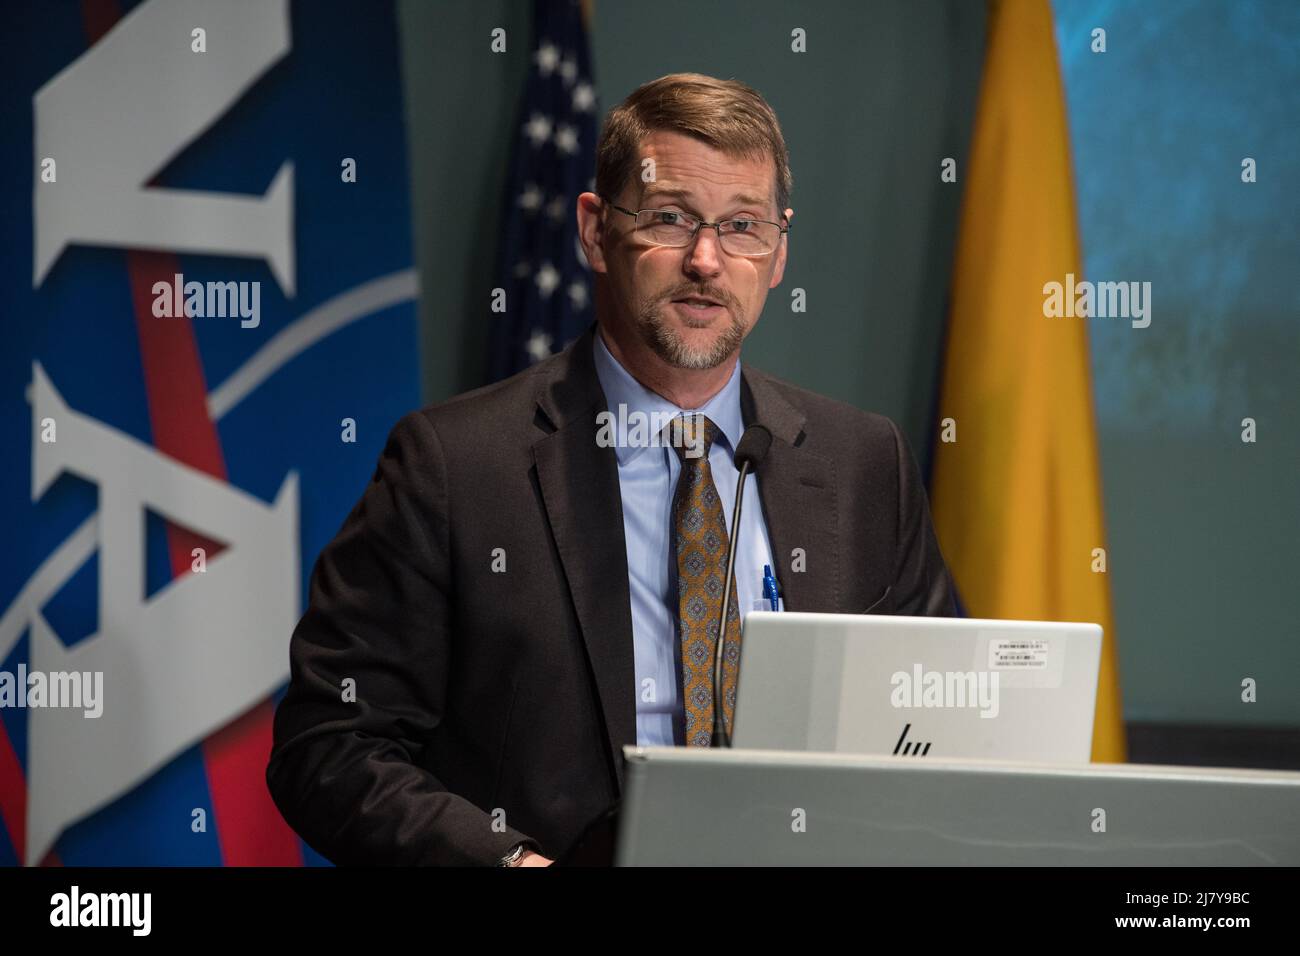 Washington, United States Of America. 10th May, 2022. Washington, United States of America. 10 May, 2022. U.S. State Department Deputy Assistant Secretary, Mark Wells, delivers remarks before Colombia signs the Artemis Accords, at the NASA Headquarters Mary W. Jackson Building, May 10, 2022 in Washington, DC, USA. Colombia is the nineteenth country to sign the Artemis Accords, which establish a practical set of principles to guide space exploration cooperation among nations participating in the NASA Artemis program. Credit: Aubrey Gemignani/NASA/Alamy Live News Stock Photo